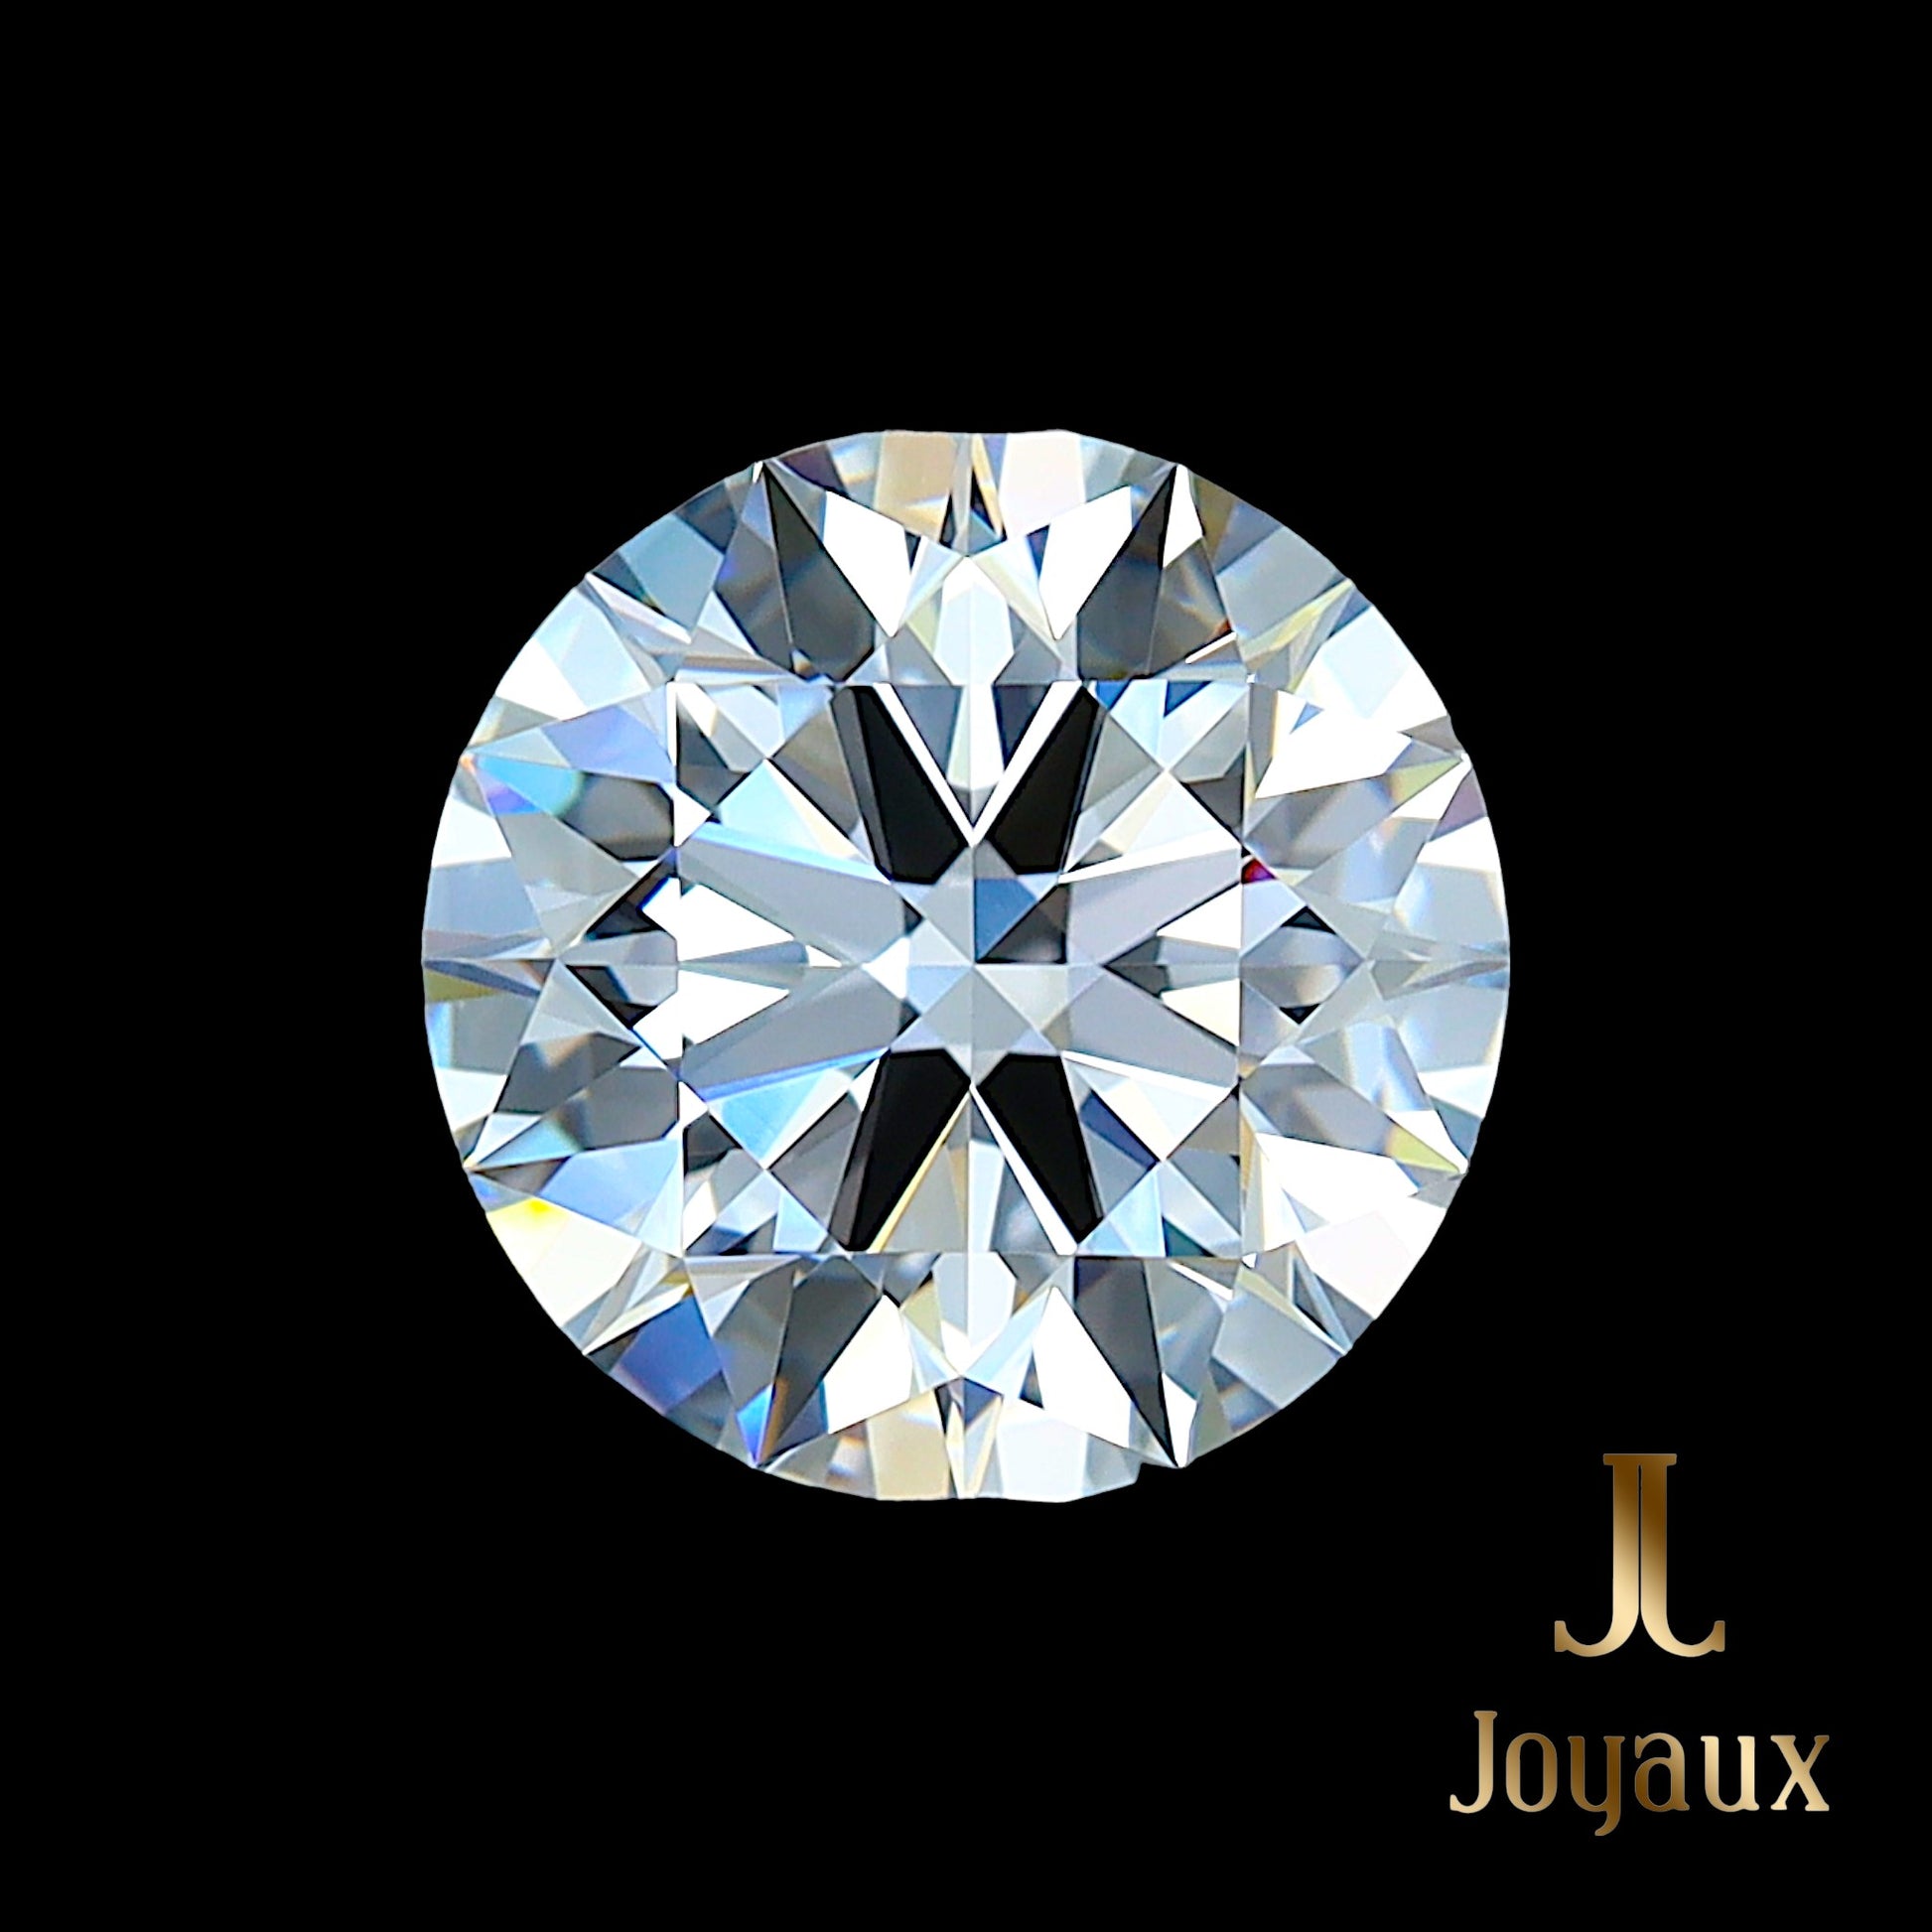 Explore the exceptional 2.03ct Joyaux™ Hearts & Arrows Diamond at Atelier de Joyaux™ Geneva. This D color, flawless, Type IIa diamond offers unparalleled brilliance and rarity, symbolizing pure and everlasting love, making it a premier investment. Available upon request in Switzerland.